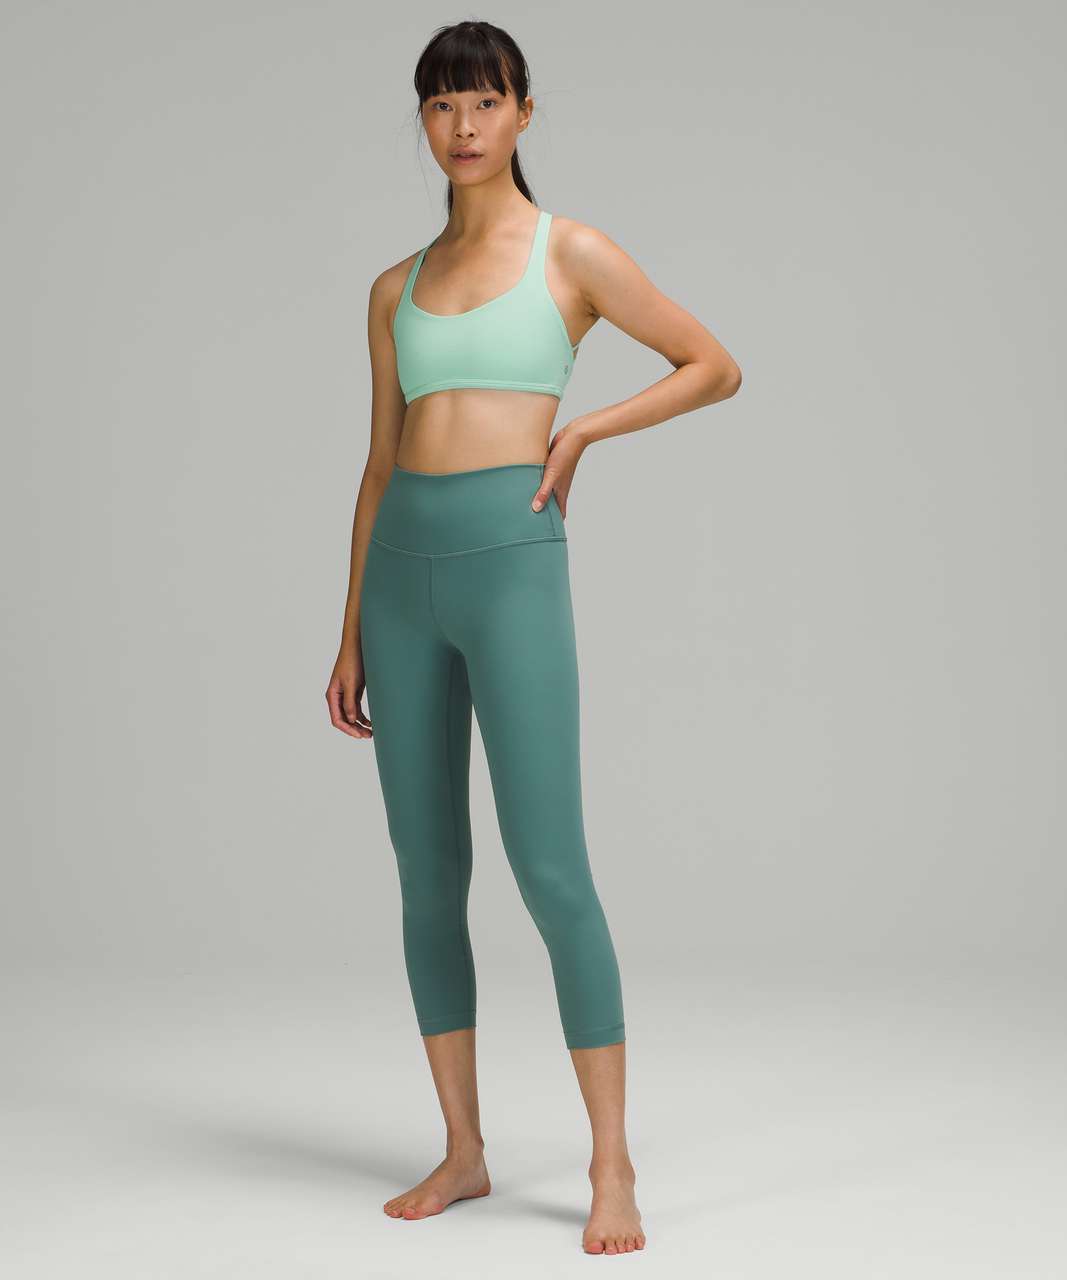 Lululemon Free to Be Bra - Wild *Light Support, A/B Cup - Wild Mint